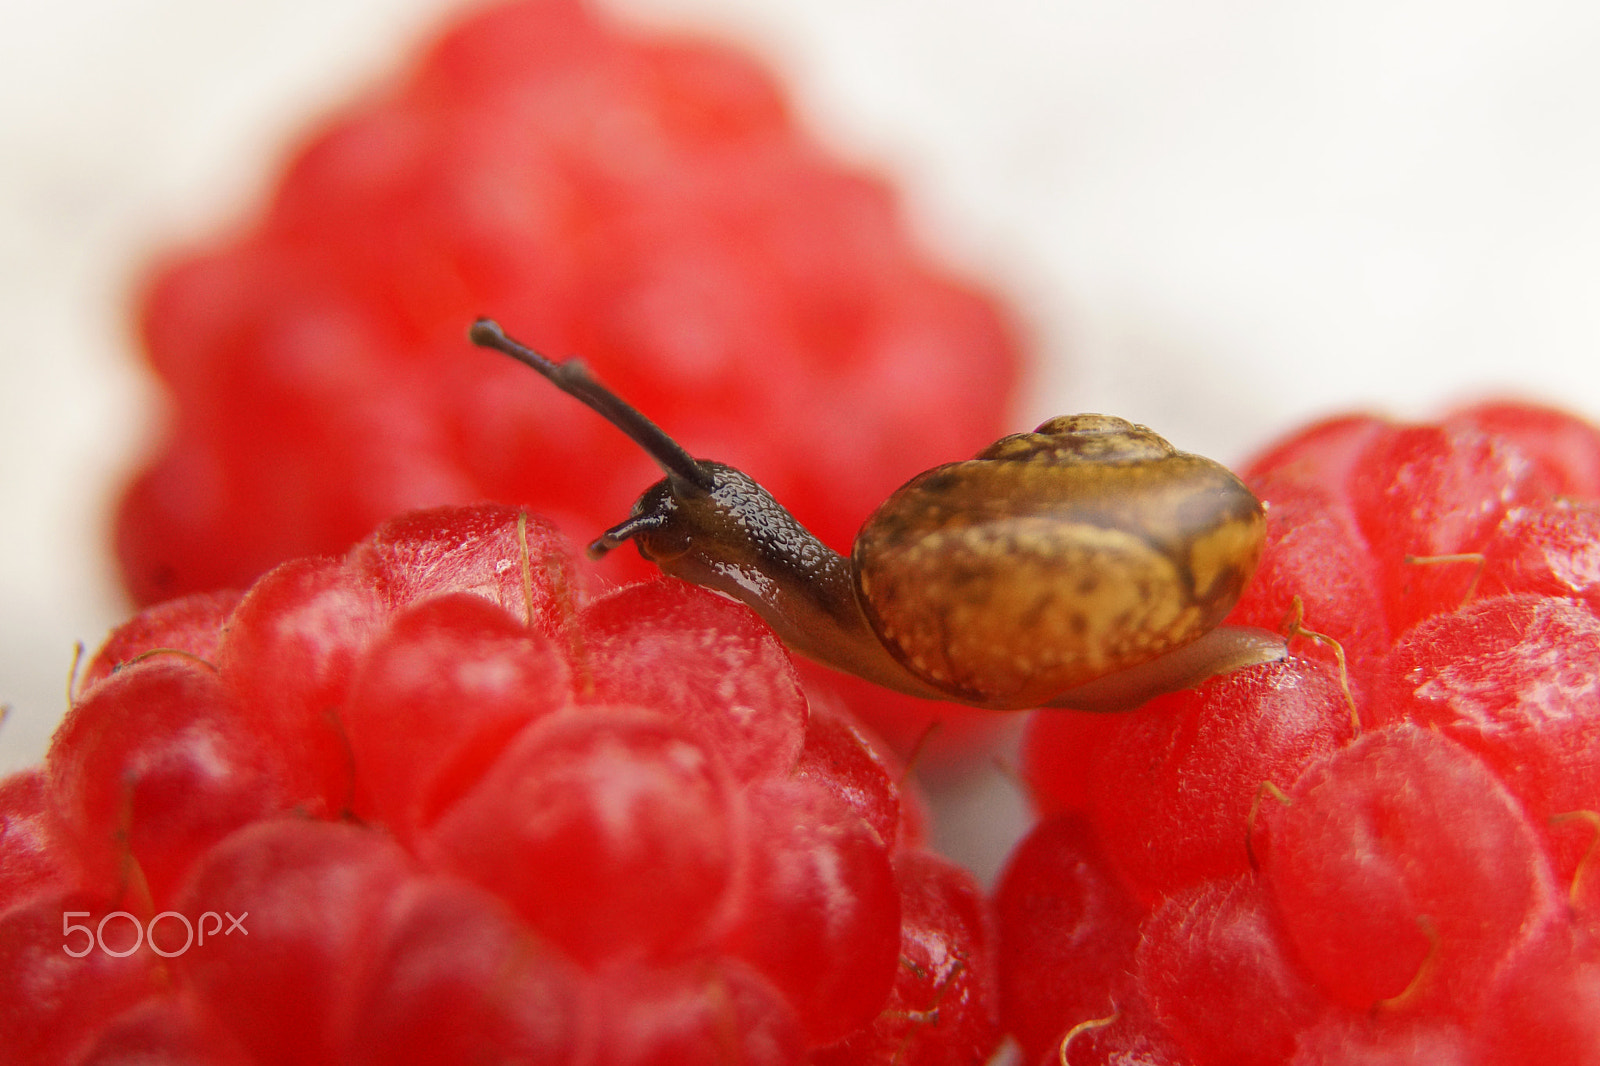 Sony SLT-A65 (SLT-A65V) sample photo. Small garden snail on red ripe berries, raspberry, closeup photography